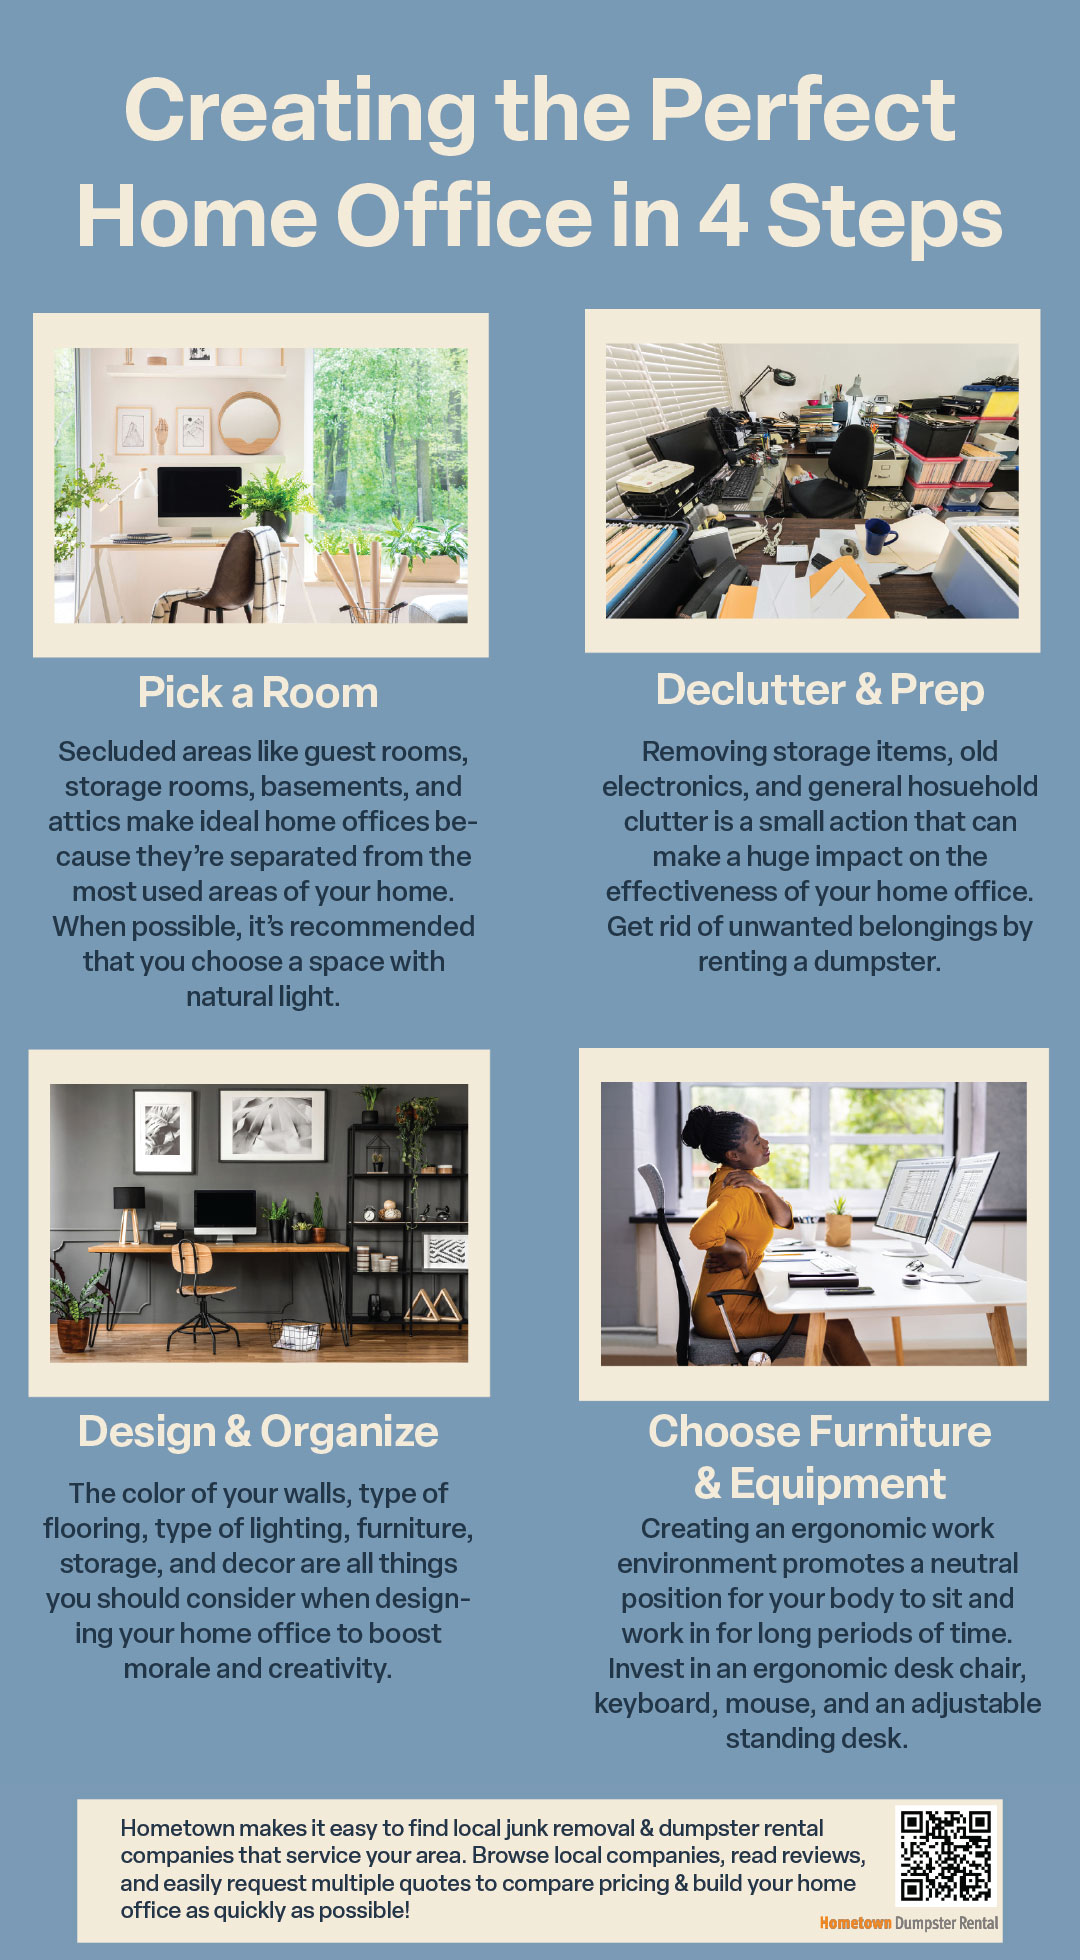 Creating the Perfect Home Office in 4 Steps Infographic